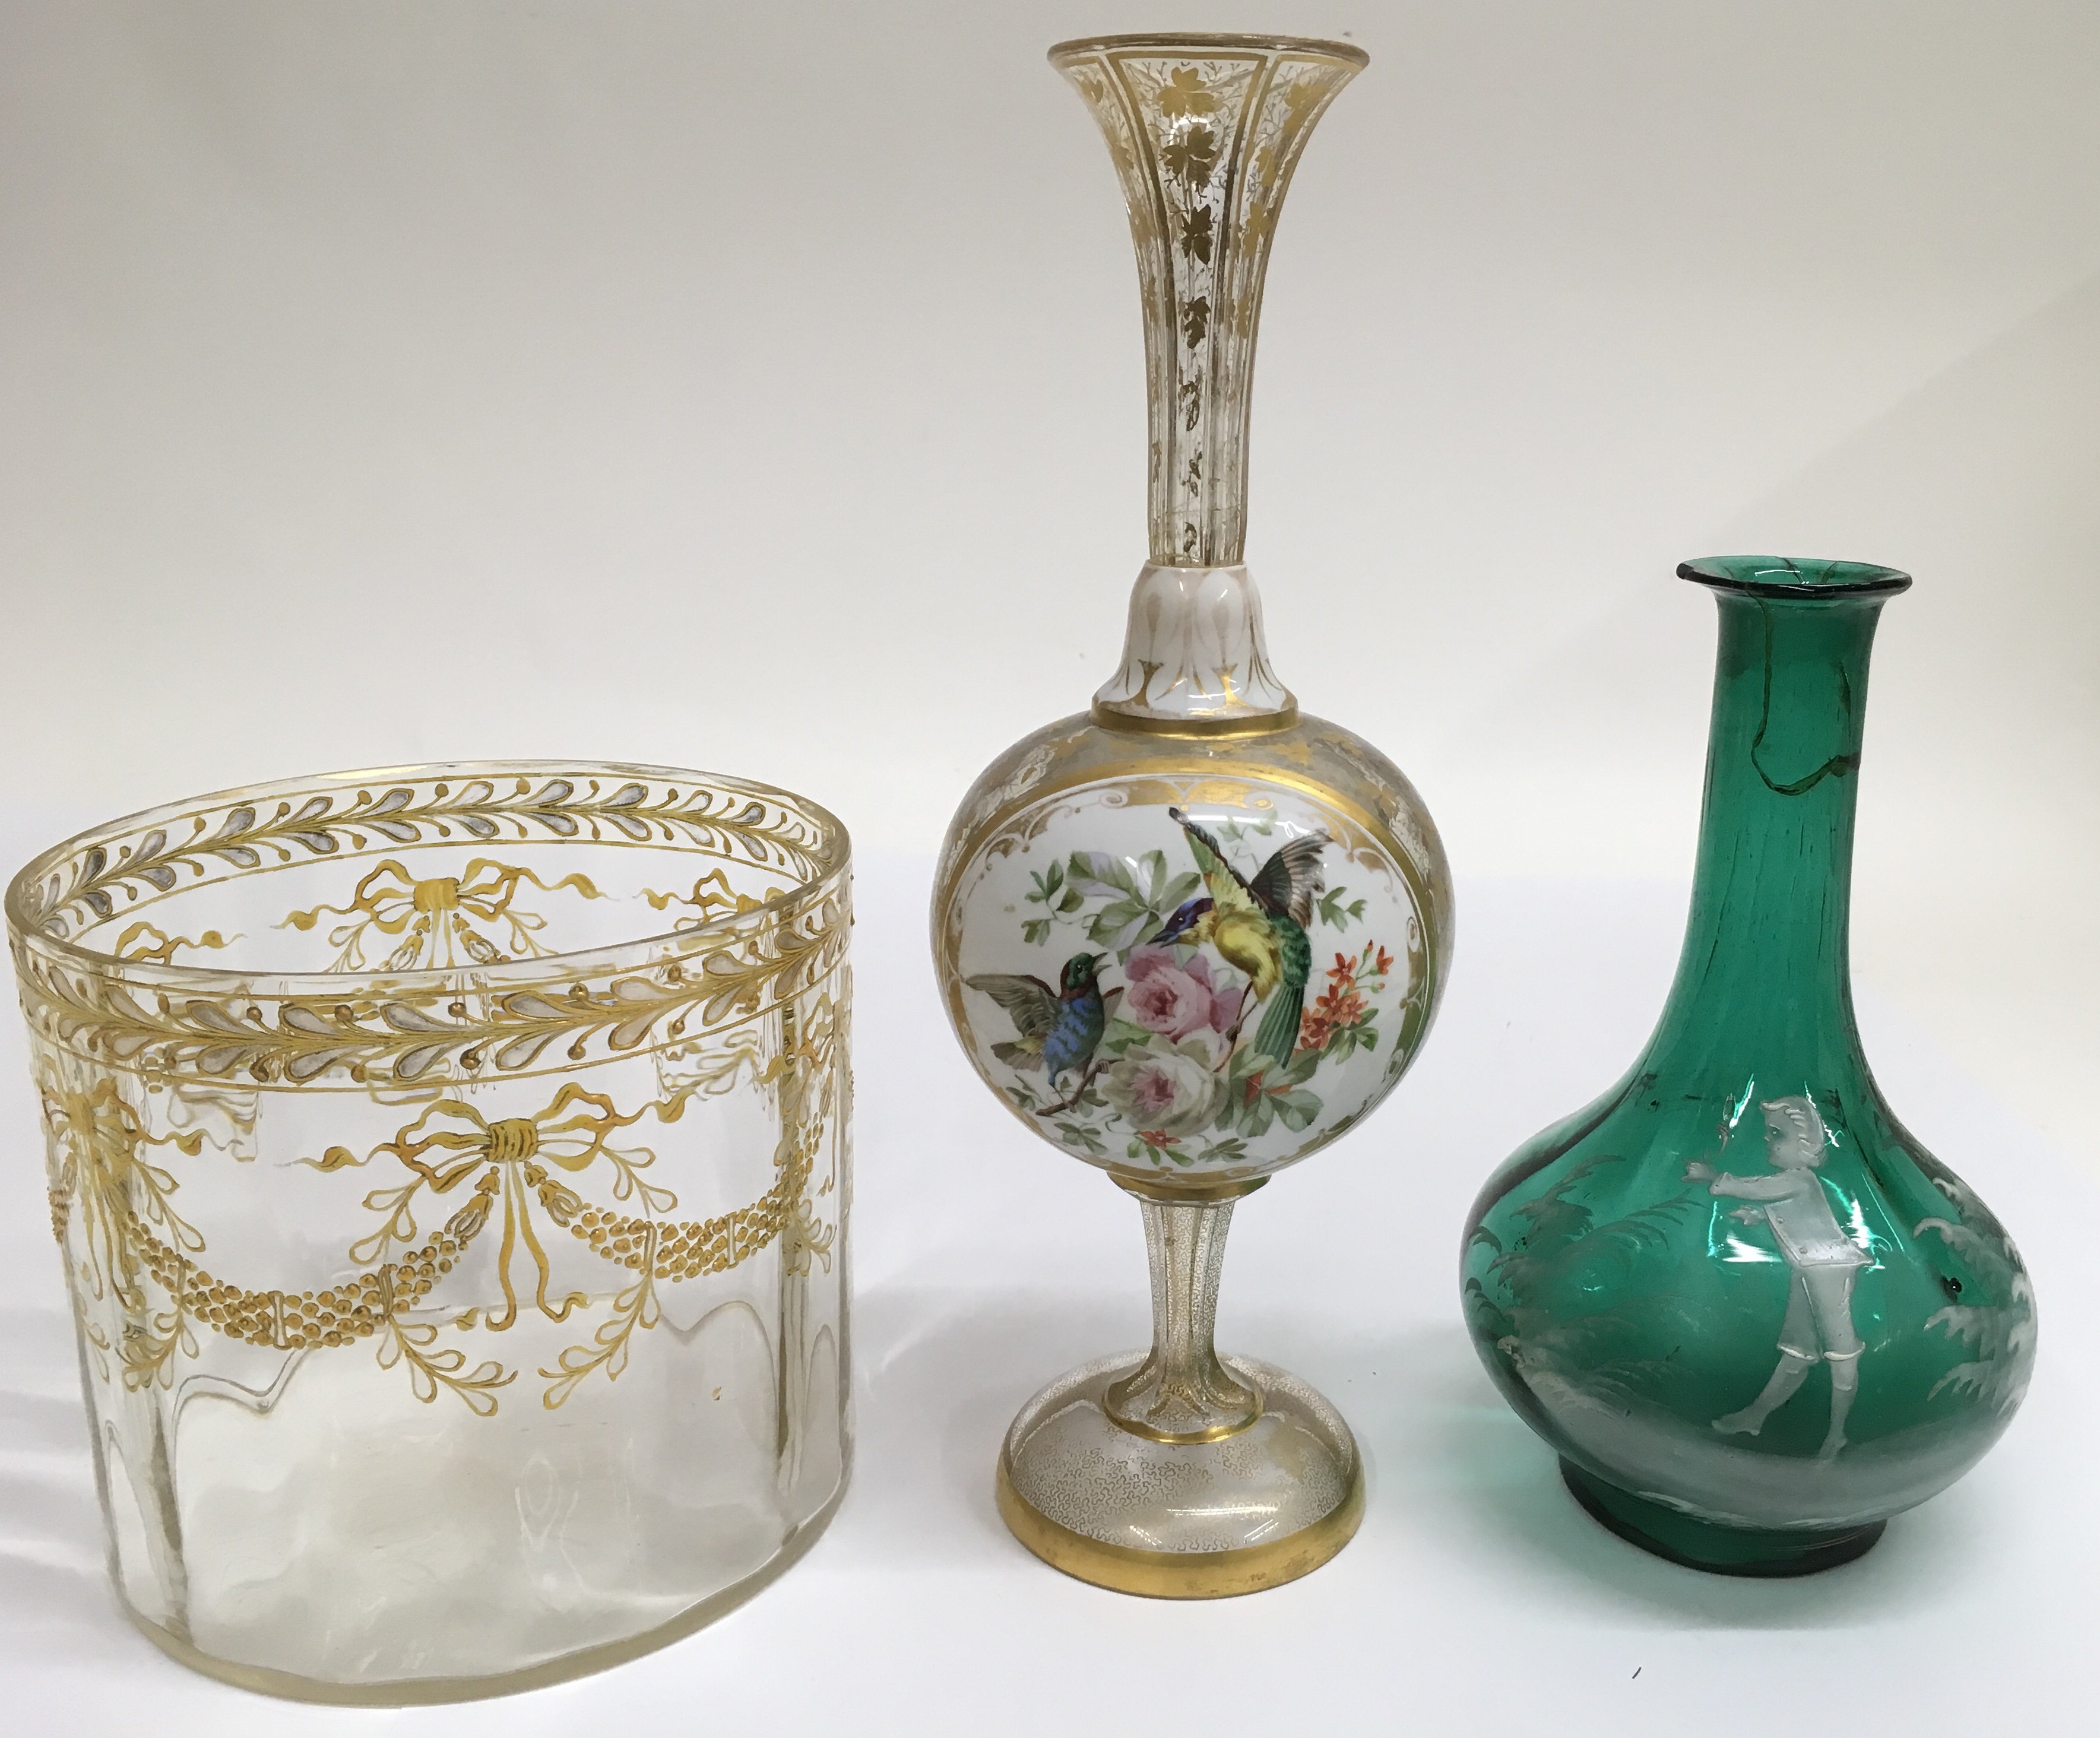 A fine Moser stem vase with central painted panels